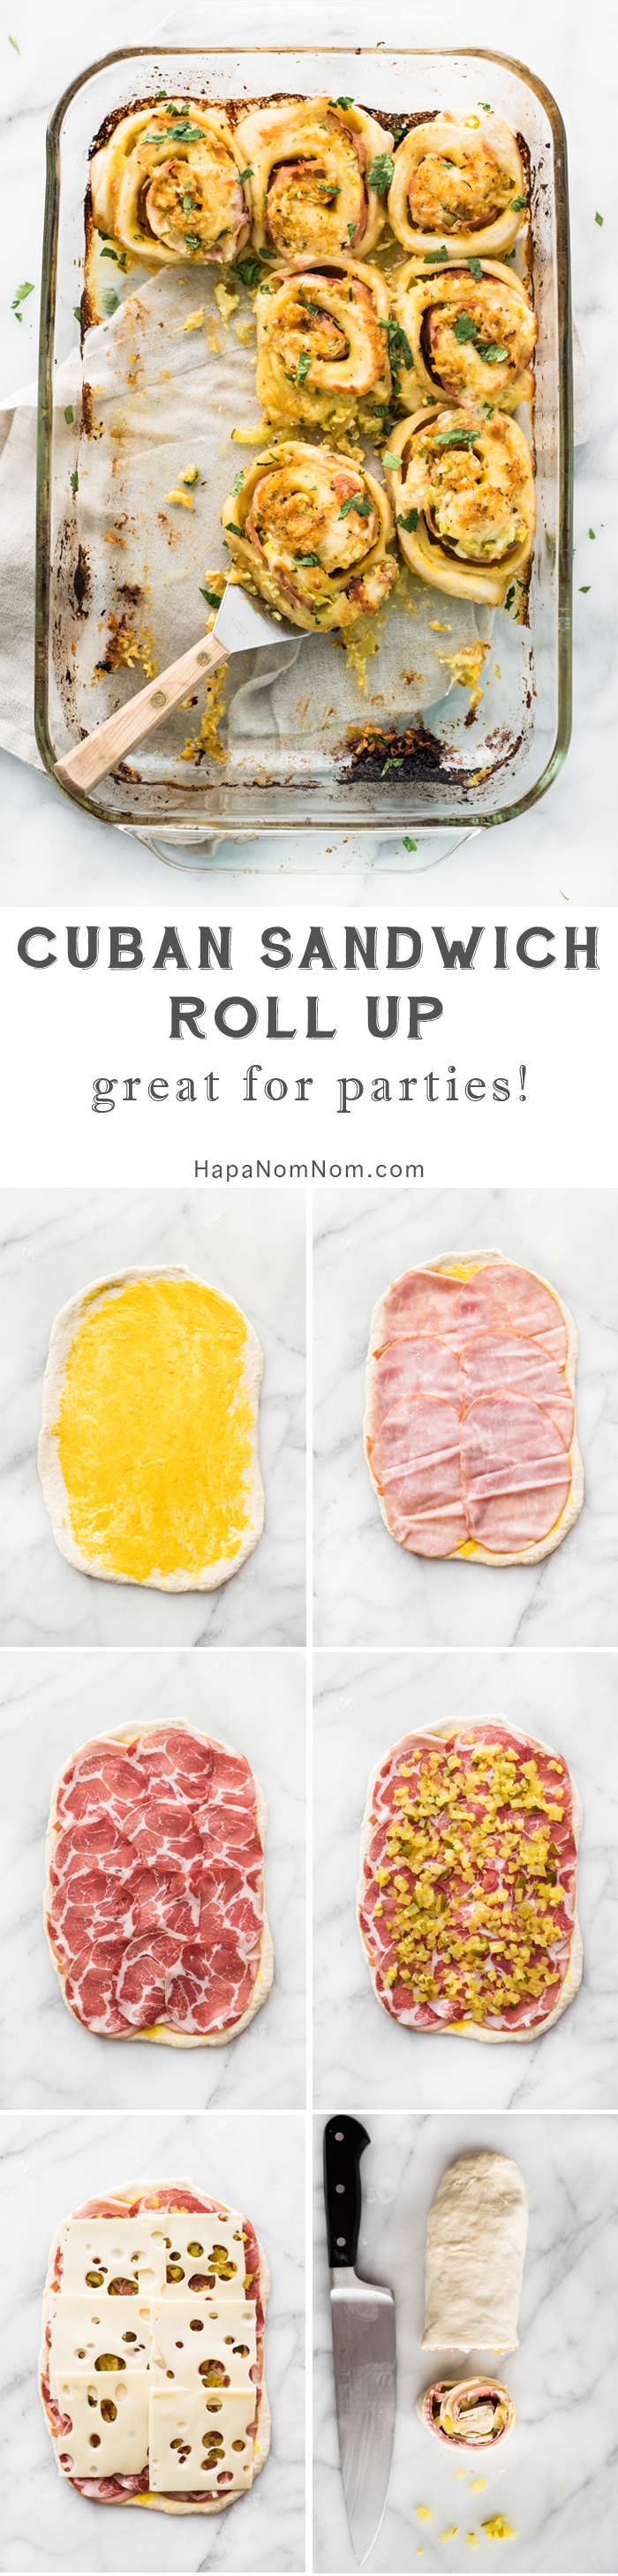 Cuban Sandwich Roll Up with Mojo Sauce Glaze - Perfect for Parties!